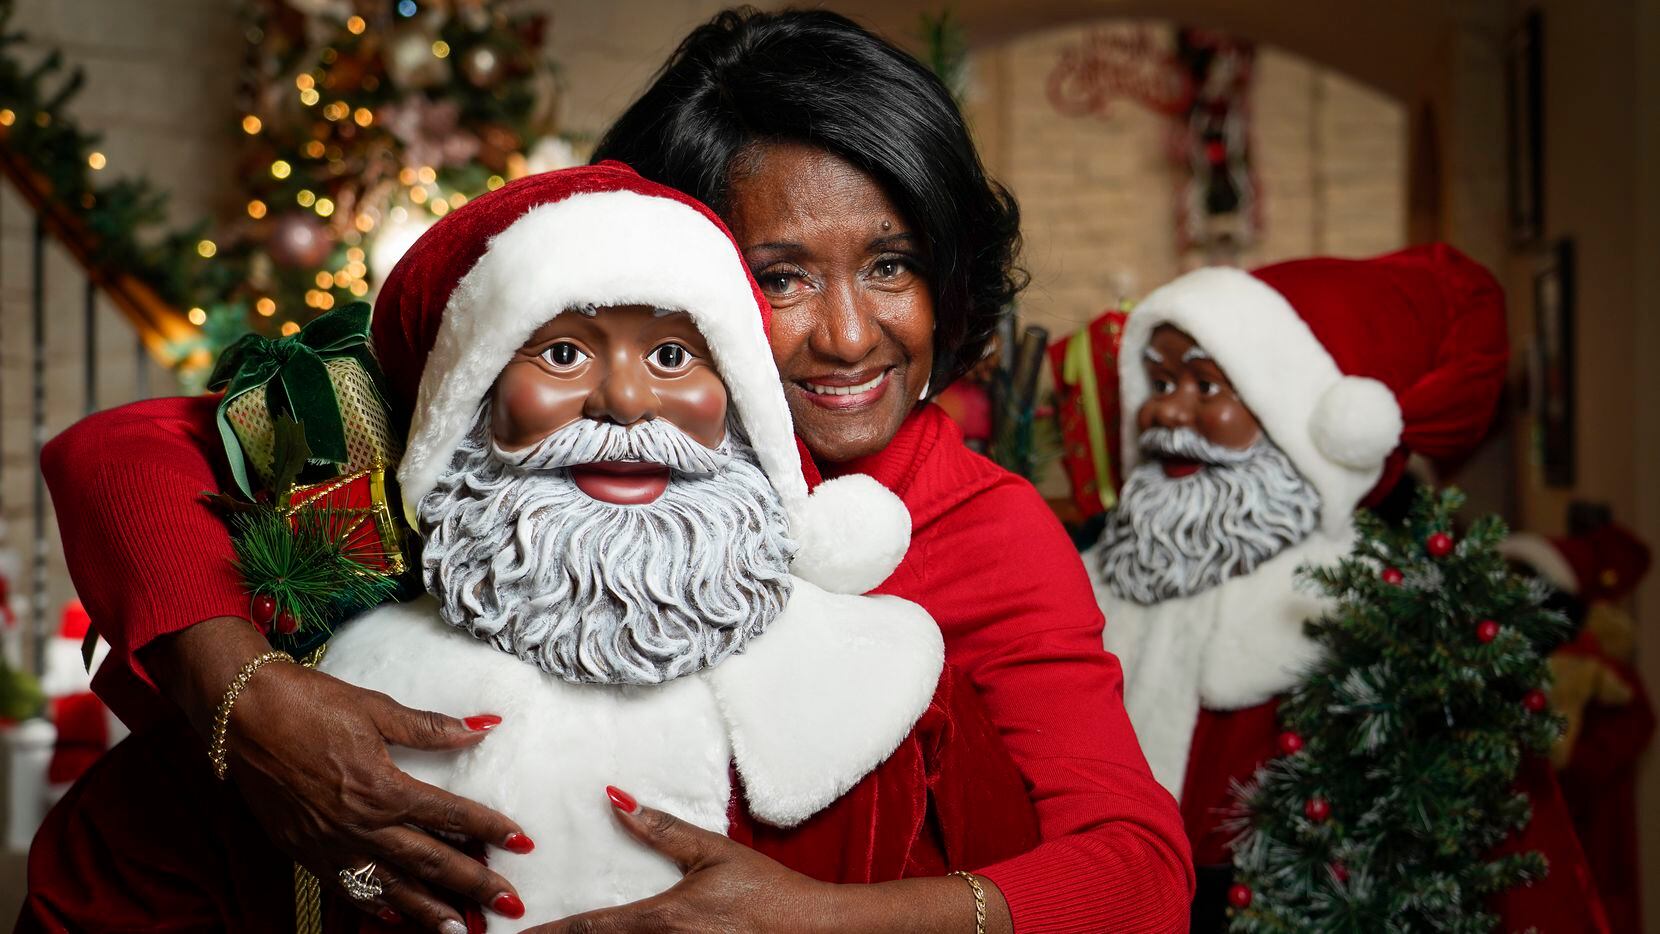 Pat Hamilton has made a yearslong passion out of collecting Black Santas. Her annual Christmas display fills both floors of her DeSoto home.